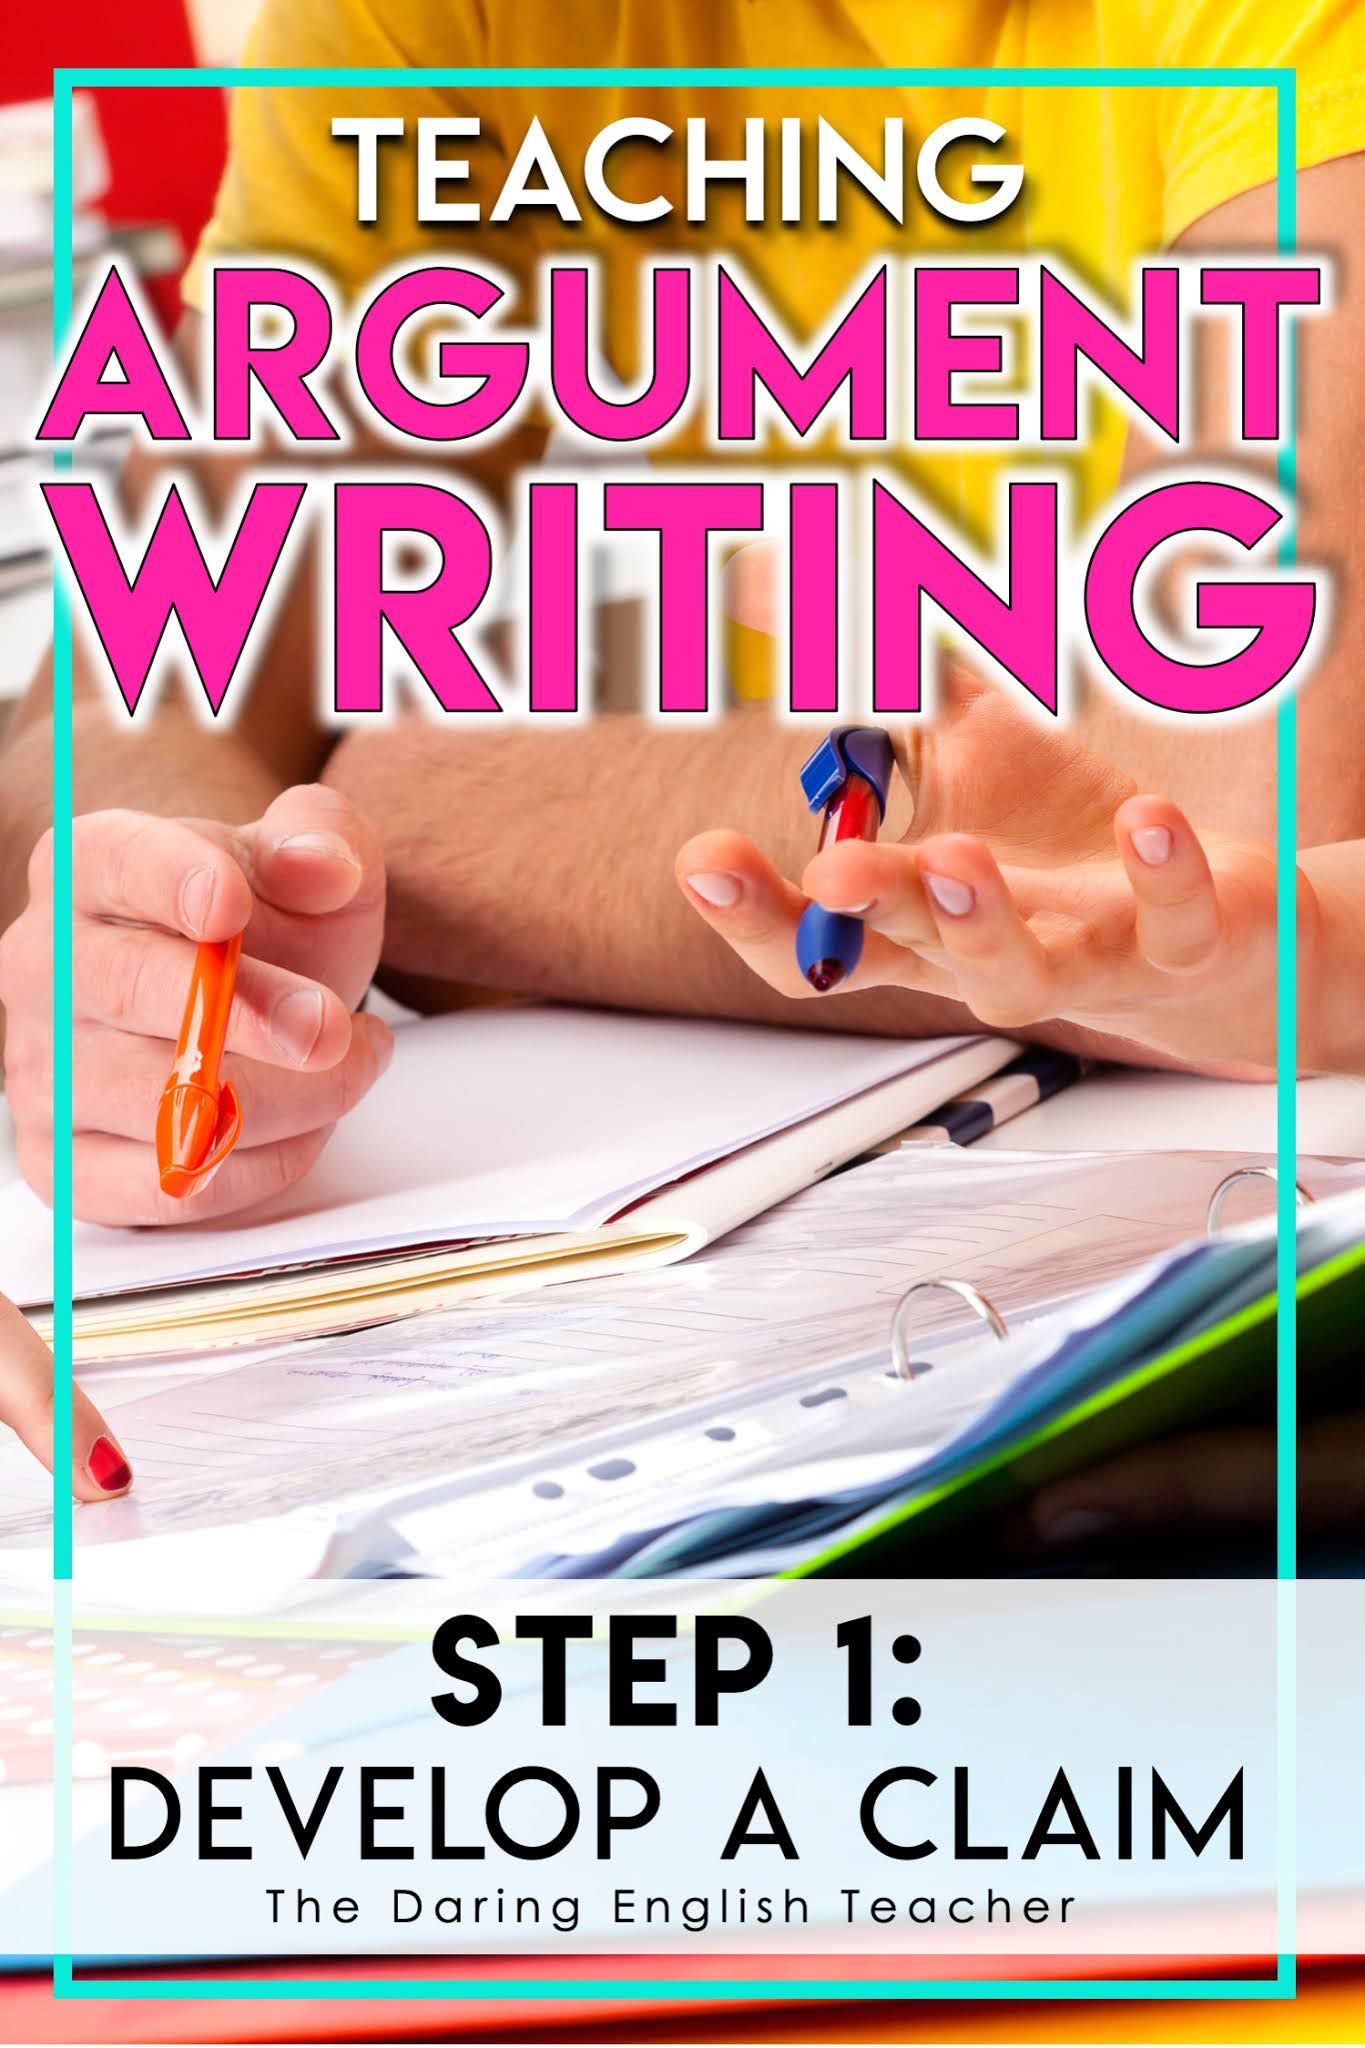 Teaching Argument Writing: Three Steps to Improve Instruction